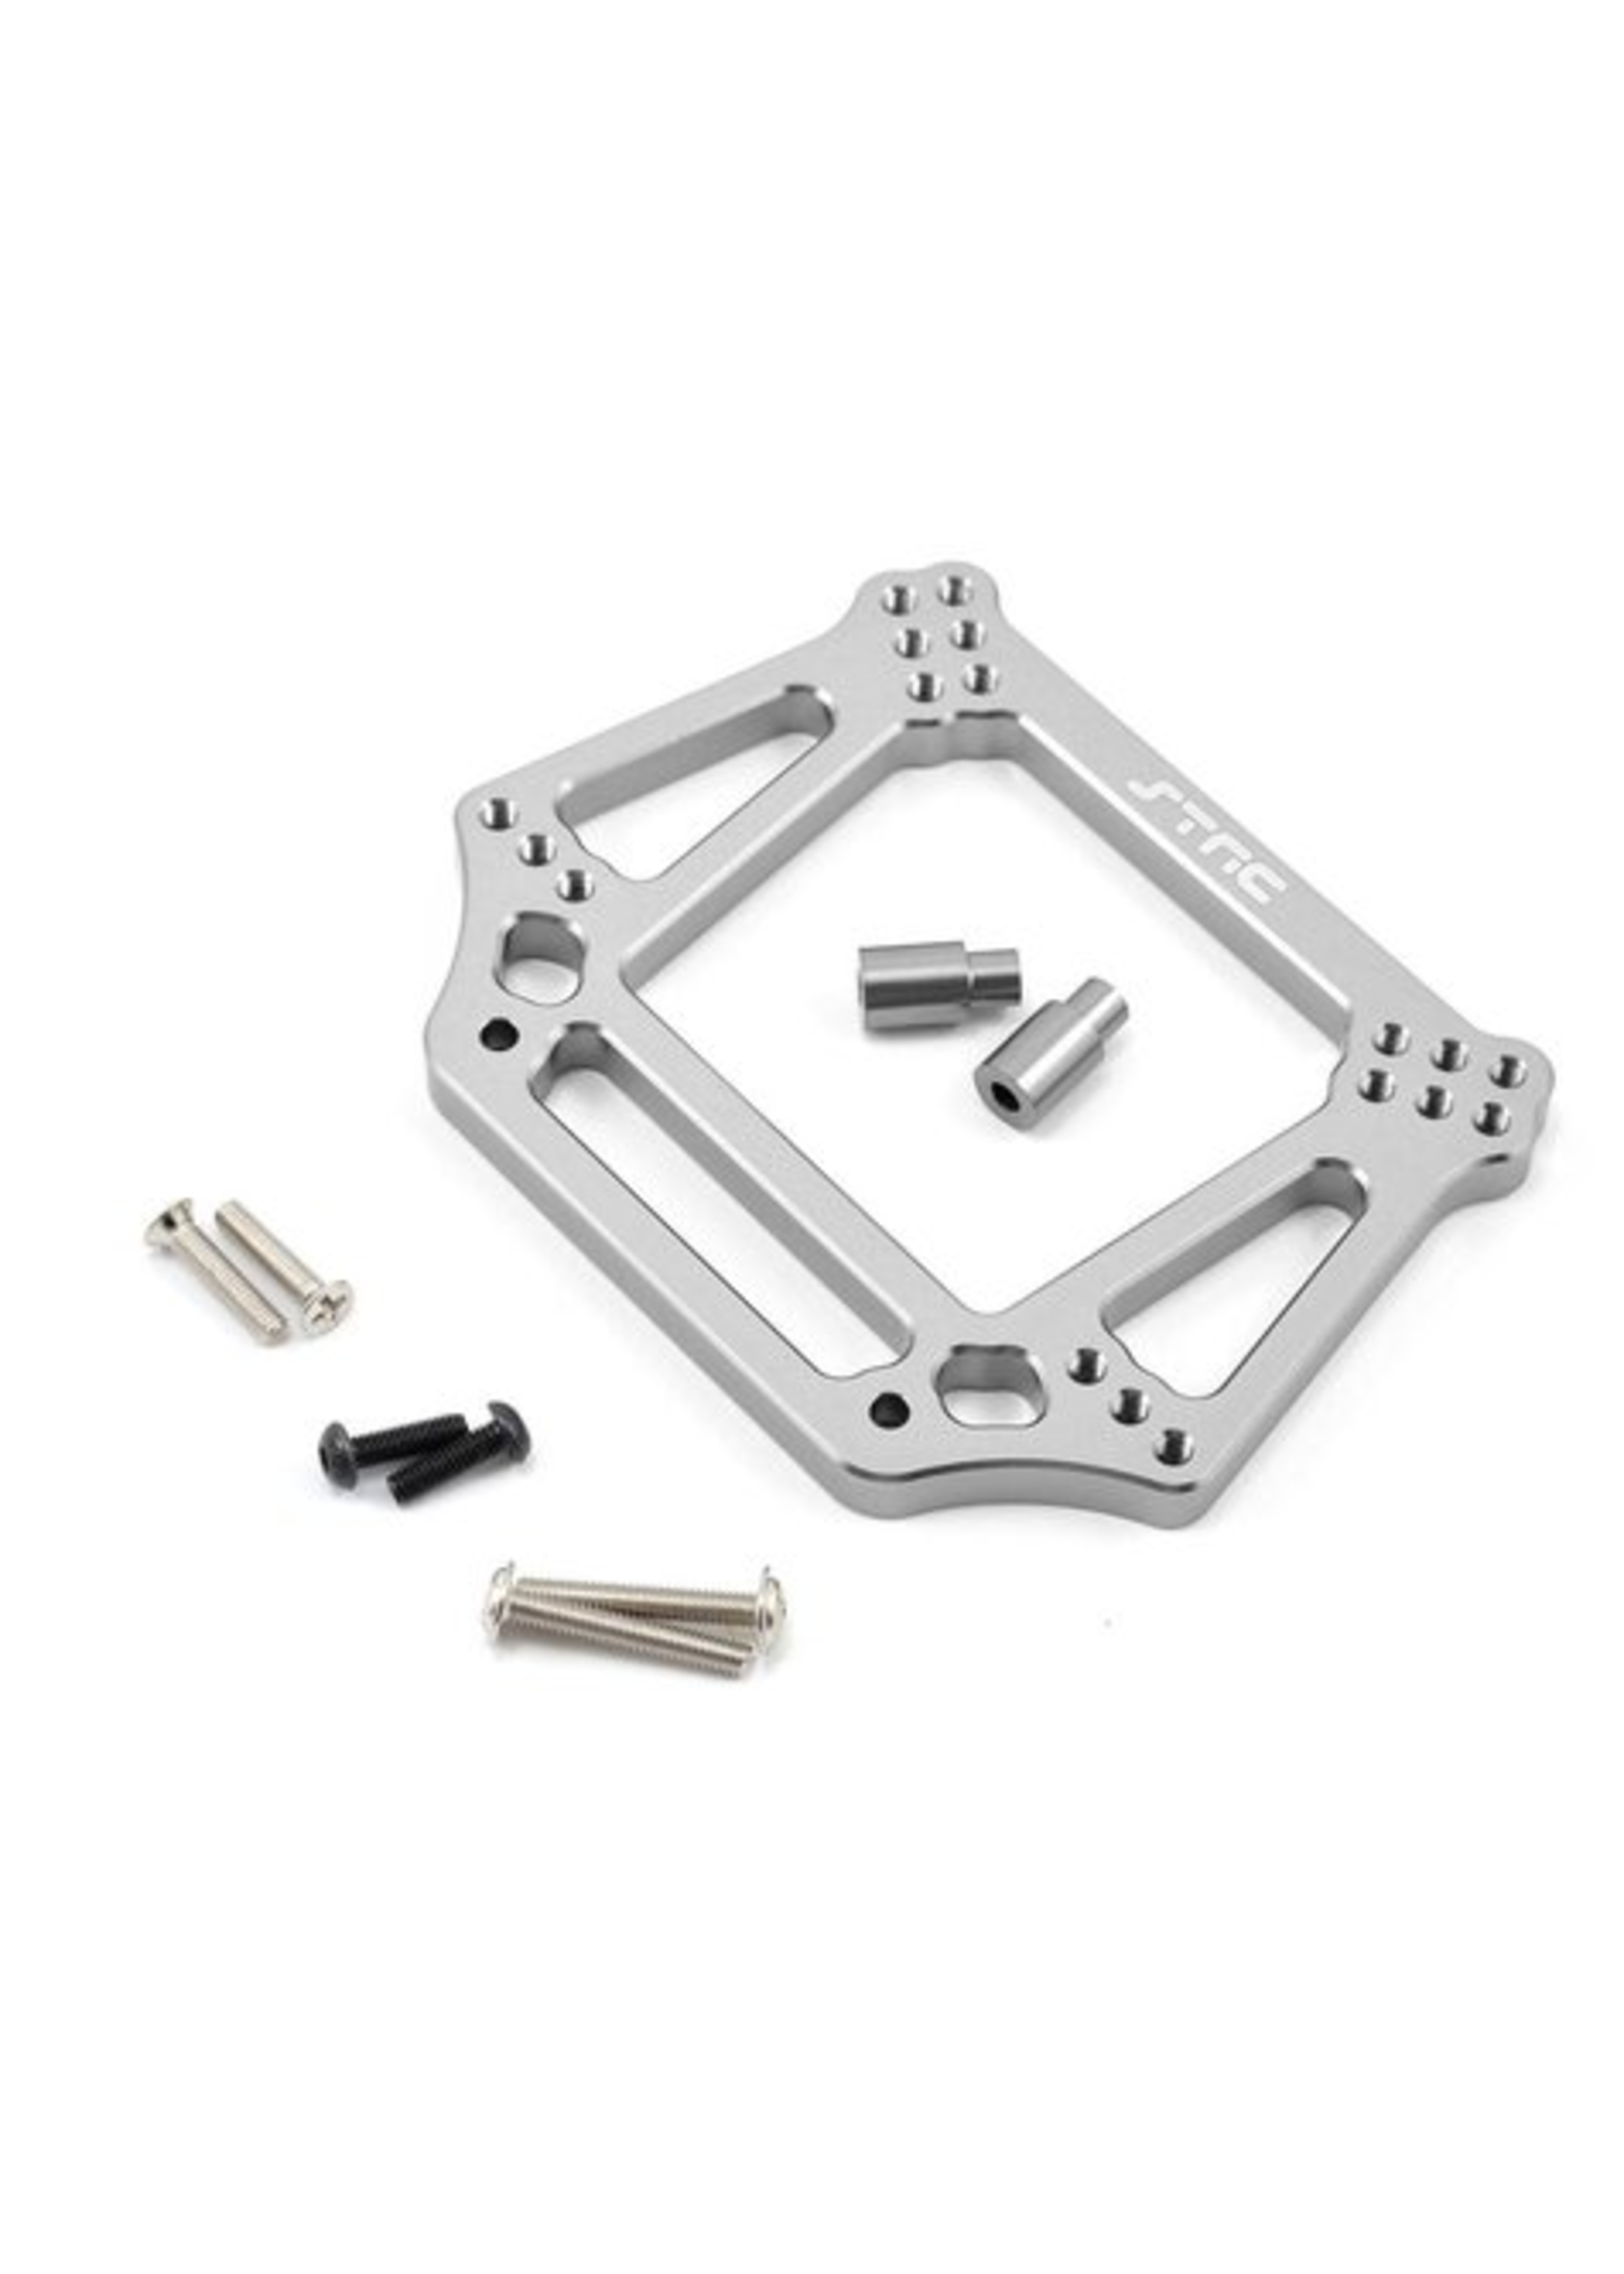 ST Racing Concepts SPTST3639S ST Racing Concepts Aluminum 6mm Heavy Duty Front Shock Tower for Traxxas Stampede/Rustler/Bandit/Slash (Silver)